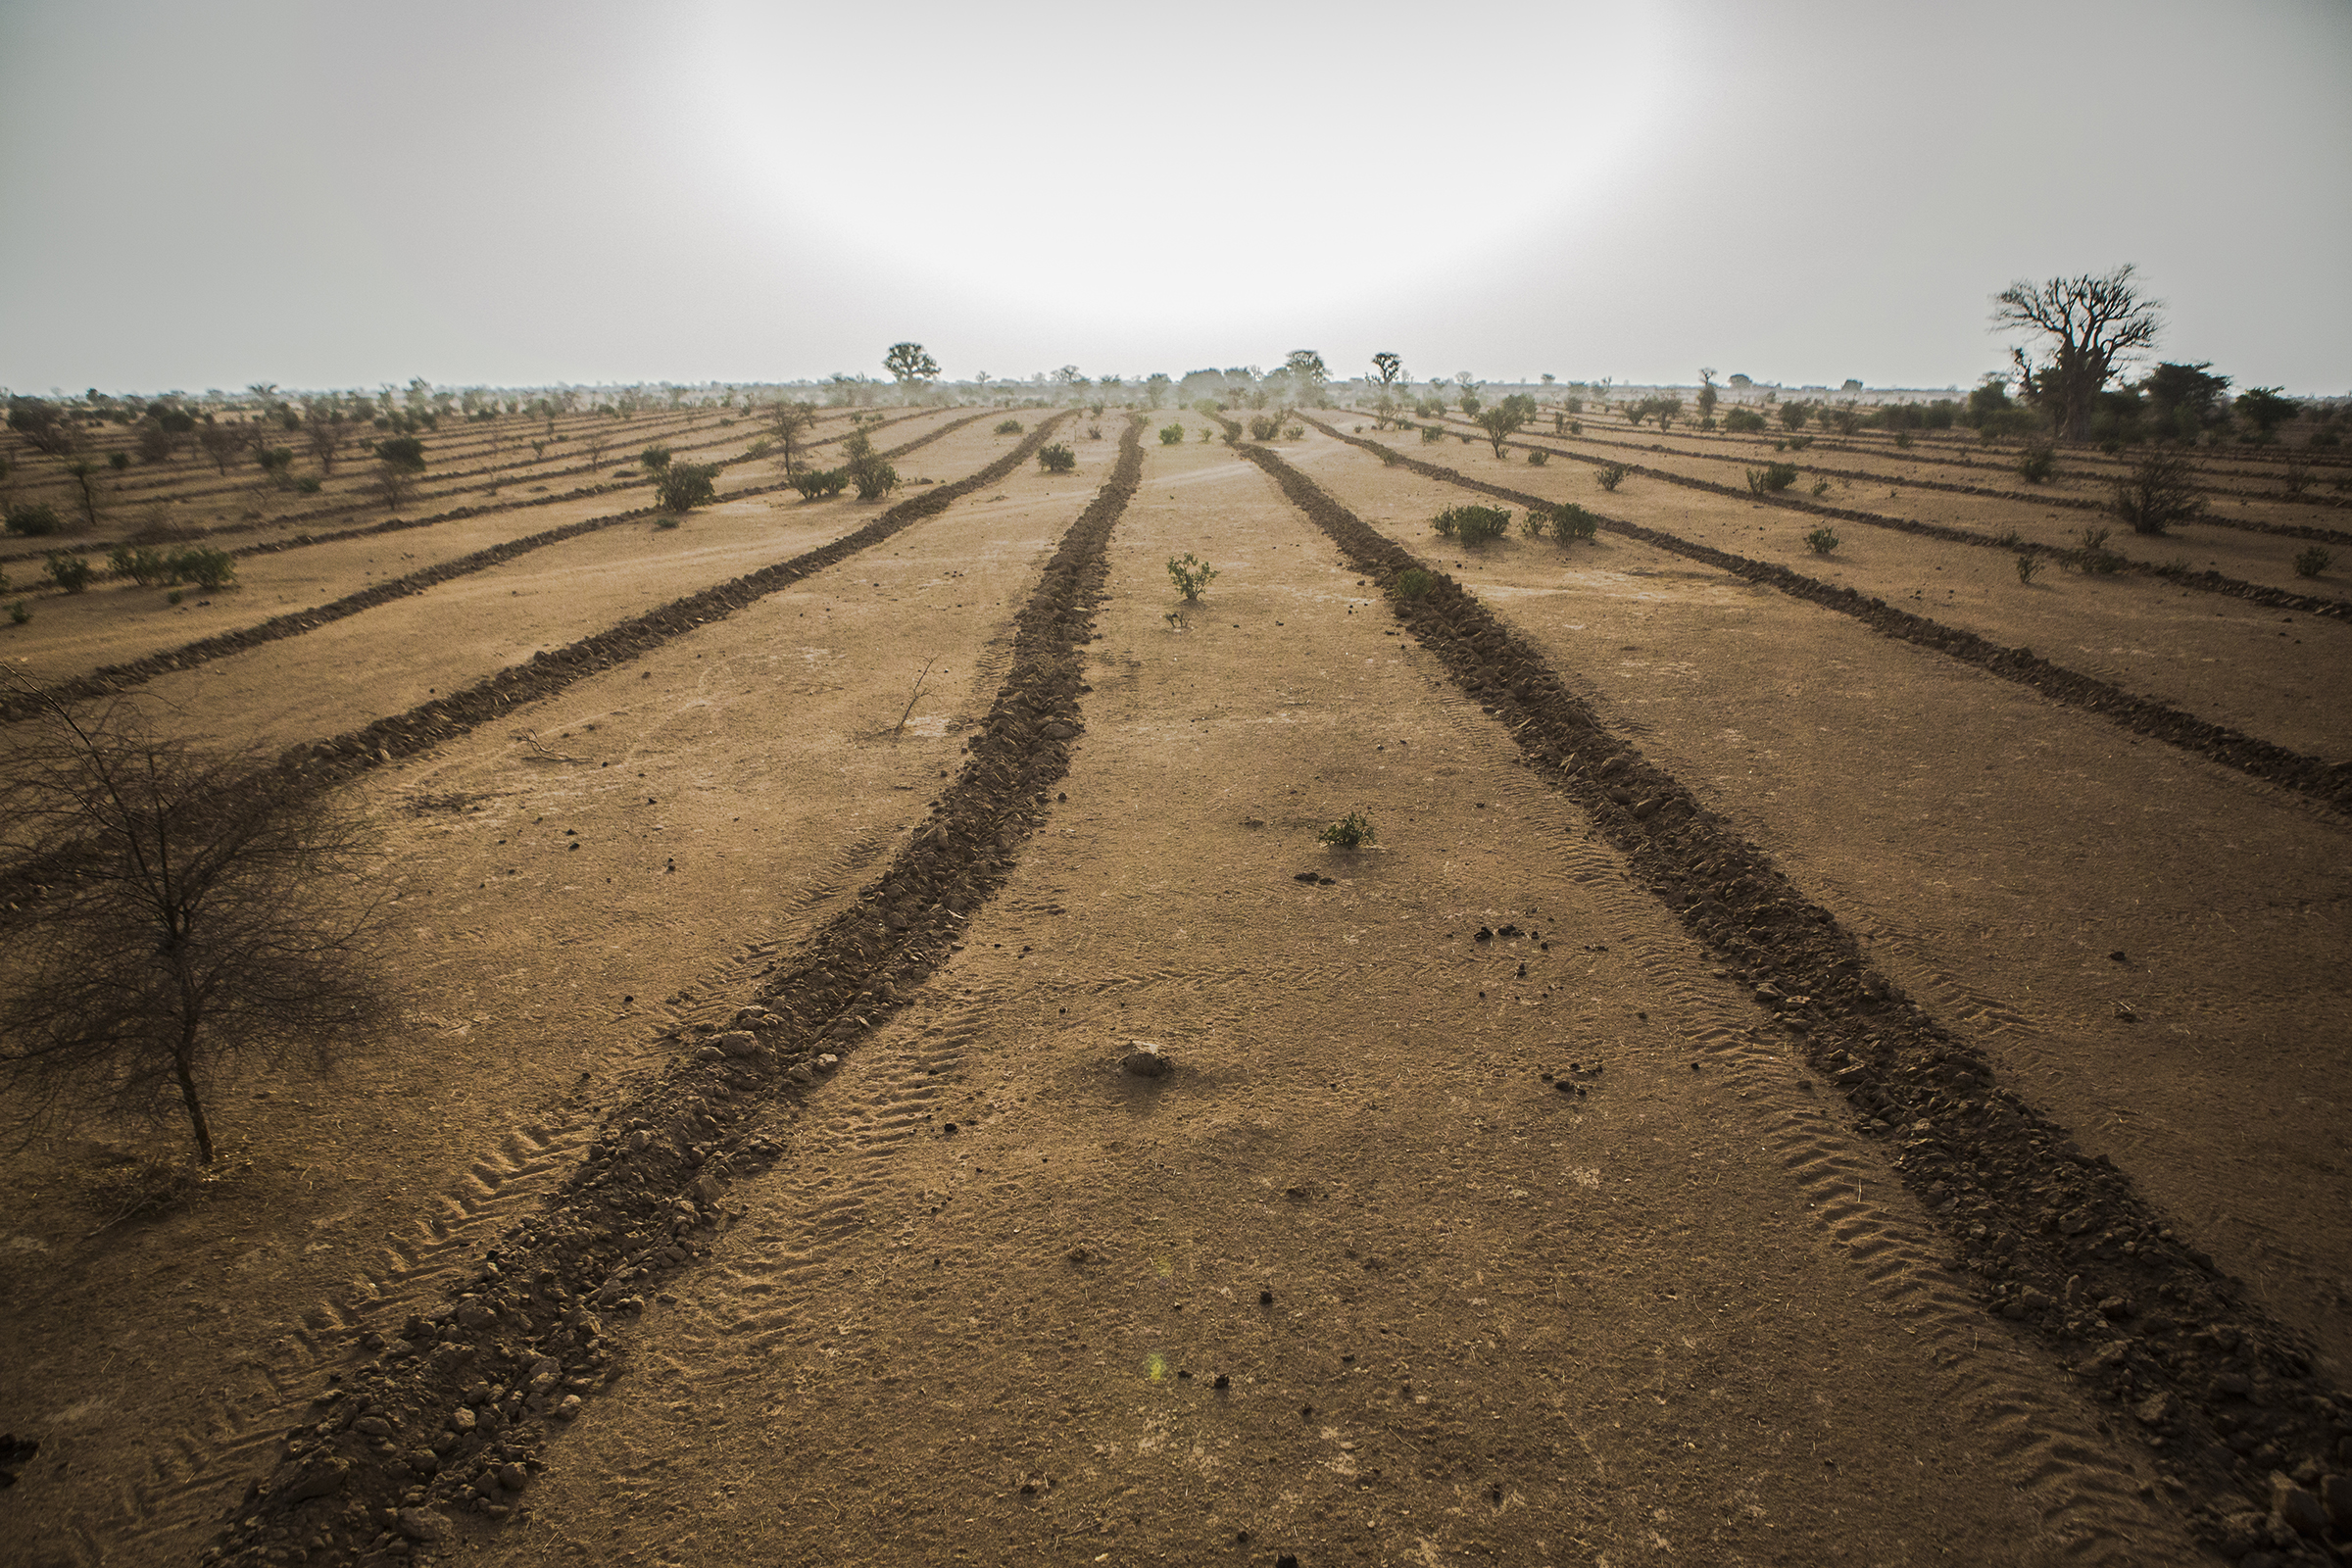 Land in Mbar Toubab, Senegal, which was plowed in anticipation of the planting of seedlings for the Great Green Wall. (Jane Hahn for TIME)